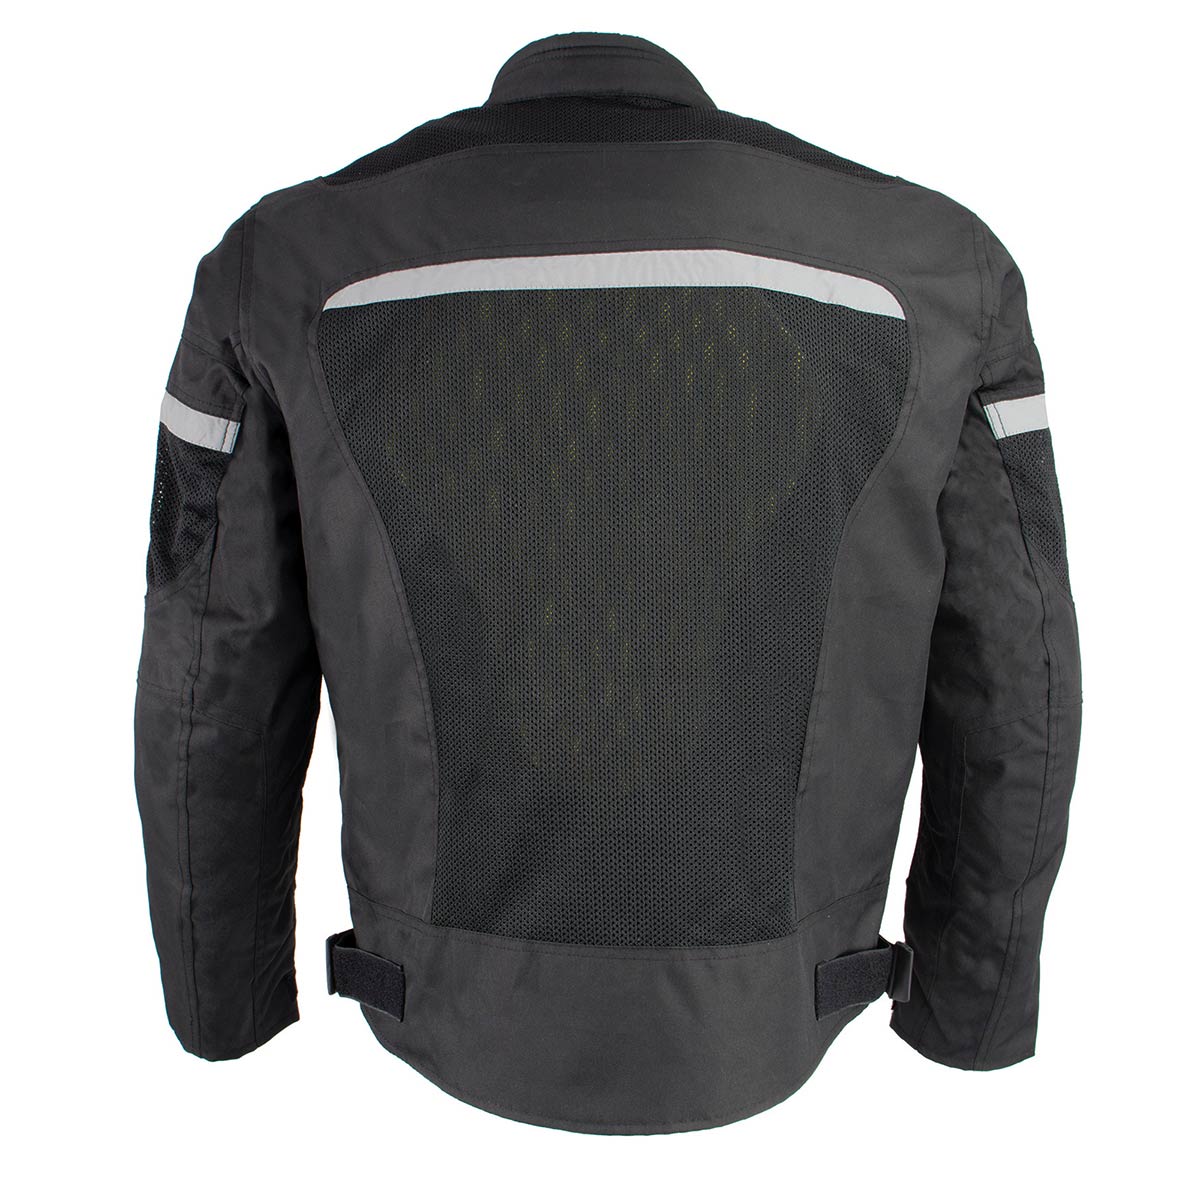 Milwaukee Leather MPM1794 Black Armored Mesh Racer Jacket with Reflective Piping for Men - All Season Jacket